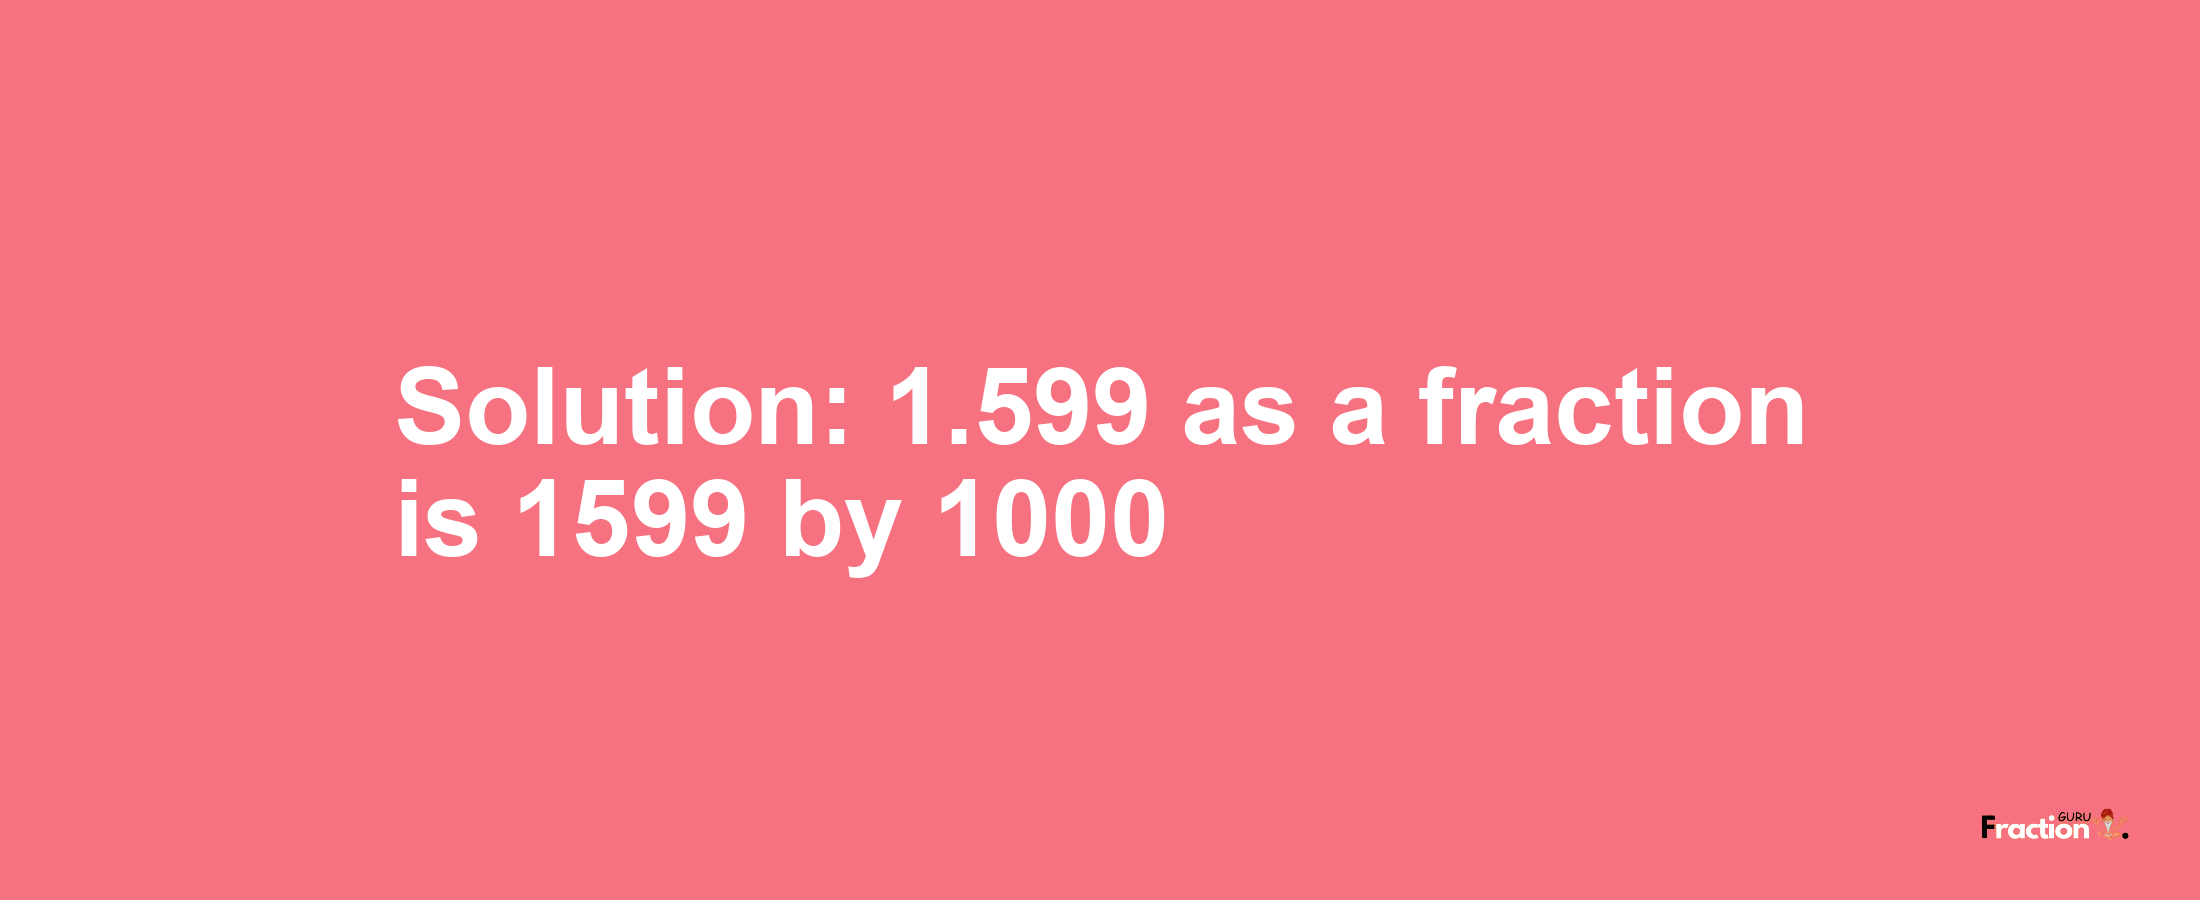 Solution:1.599 as a fraction is 1599/1000